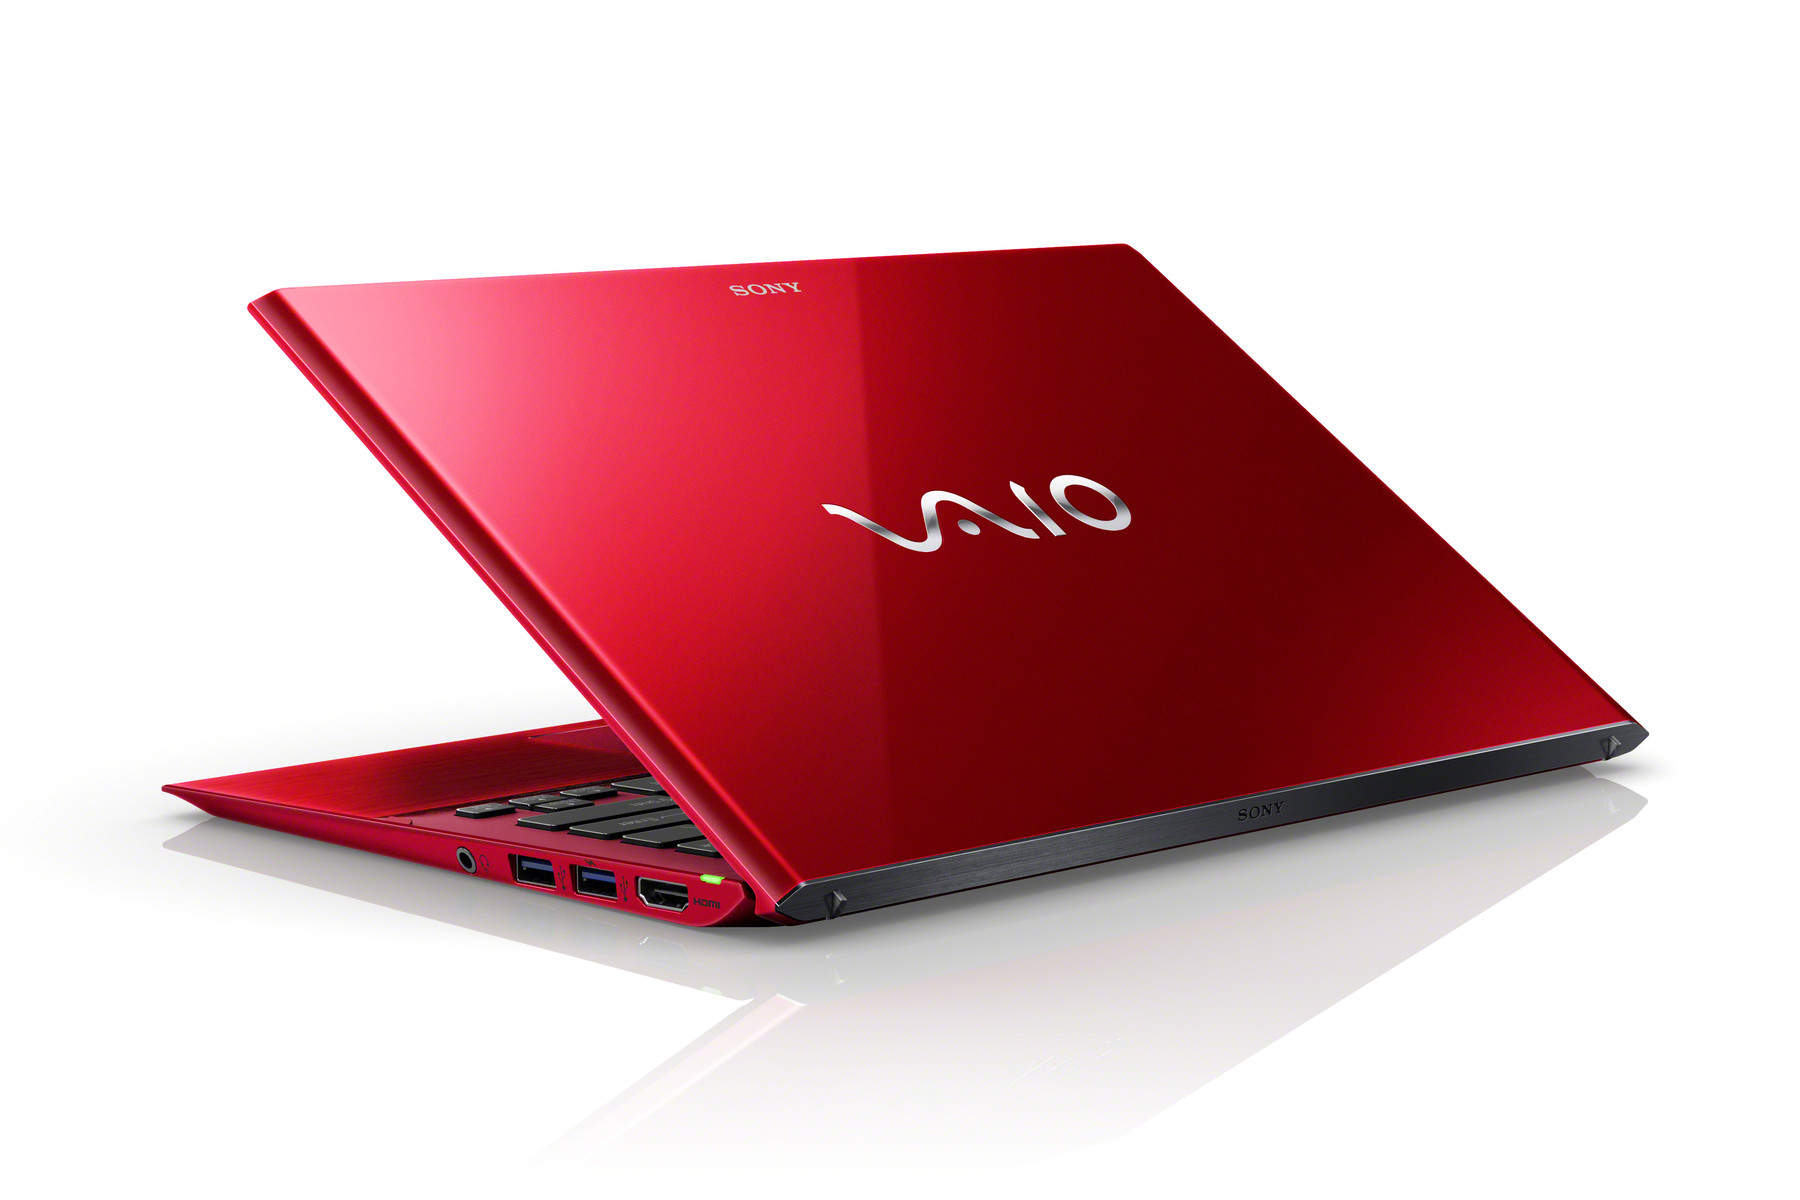 Sony releases the luxury VAIO | Red - NotebookCheck.net News